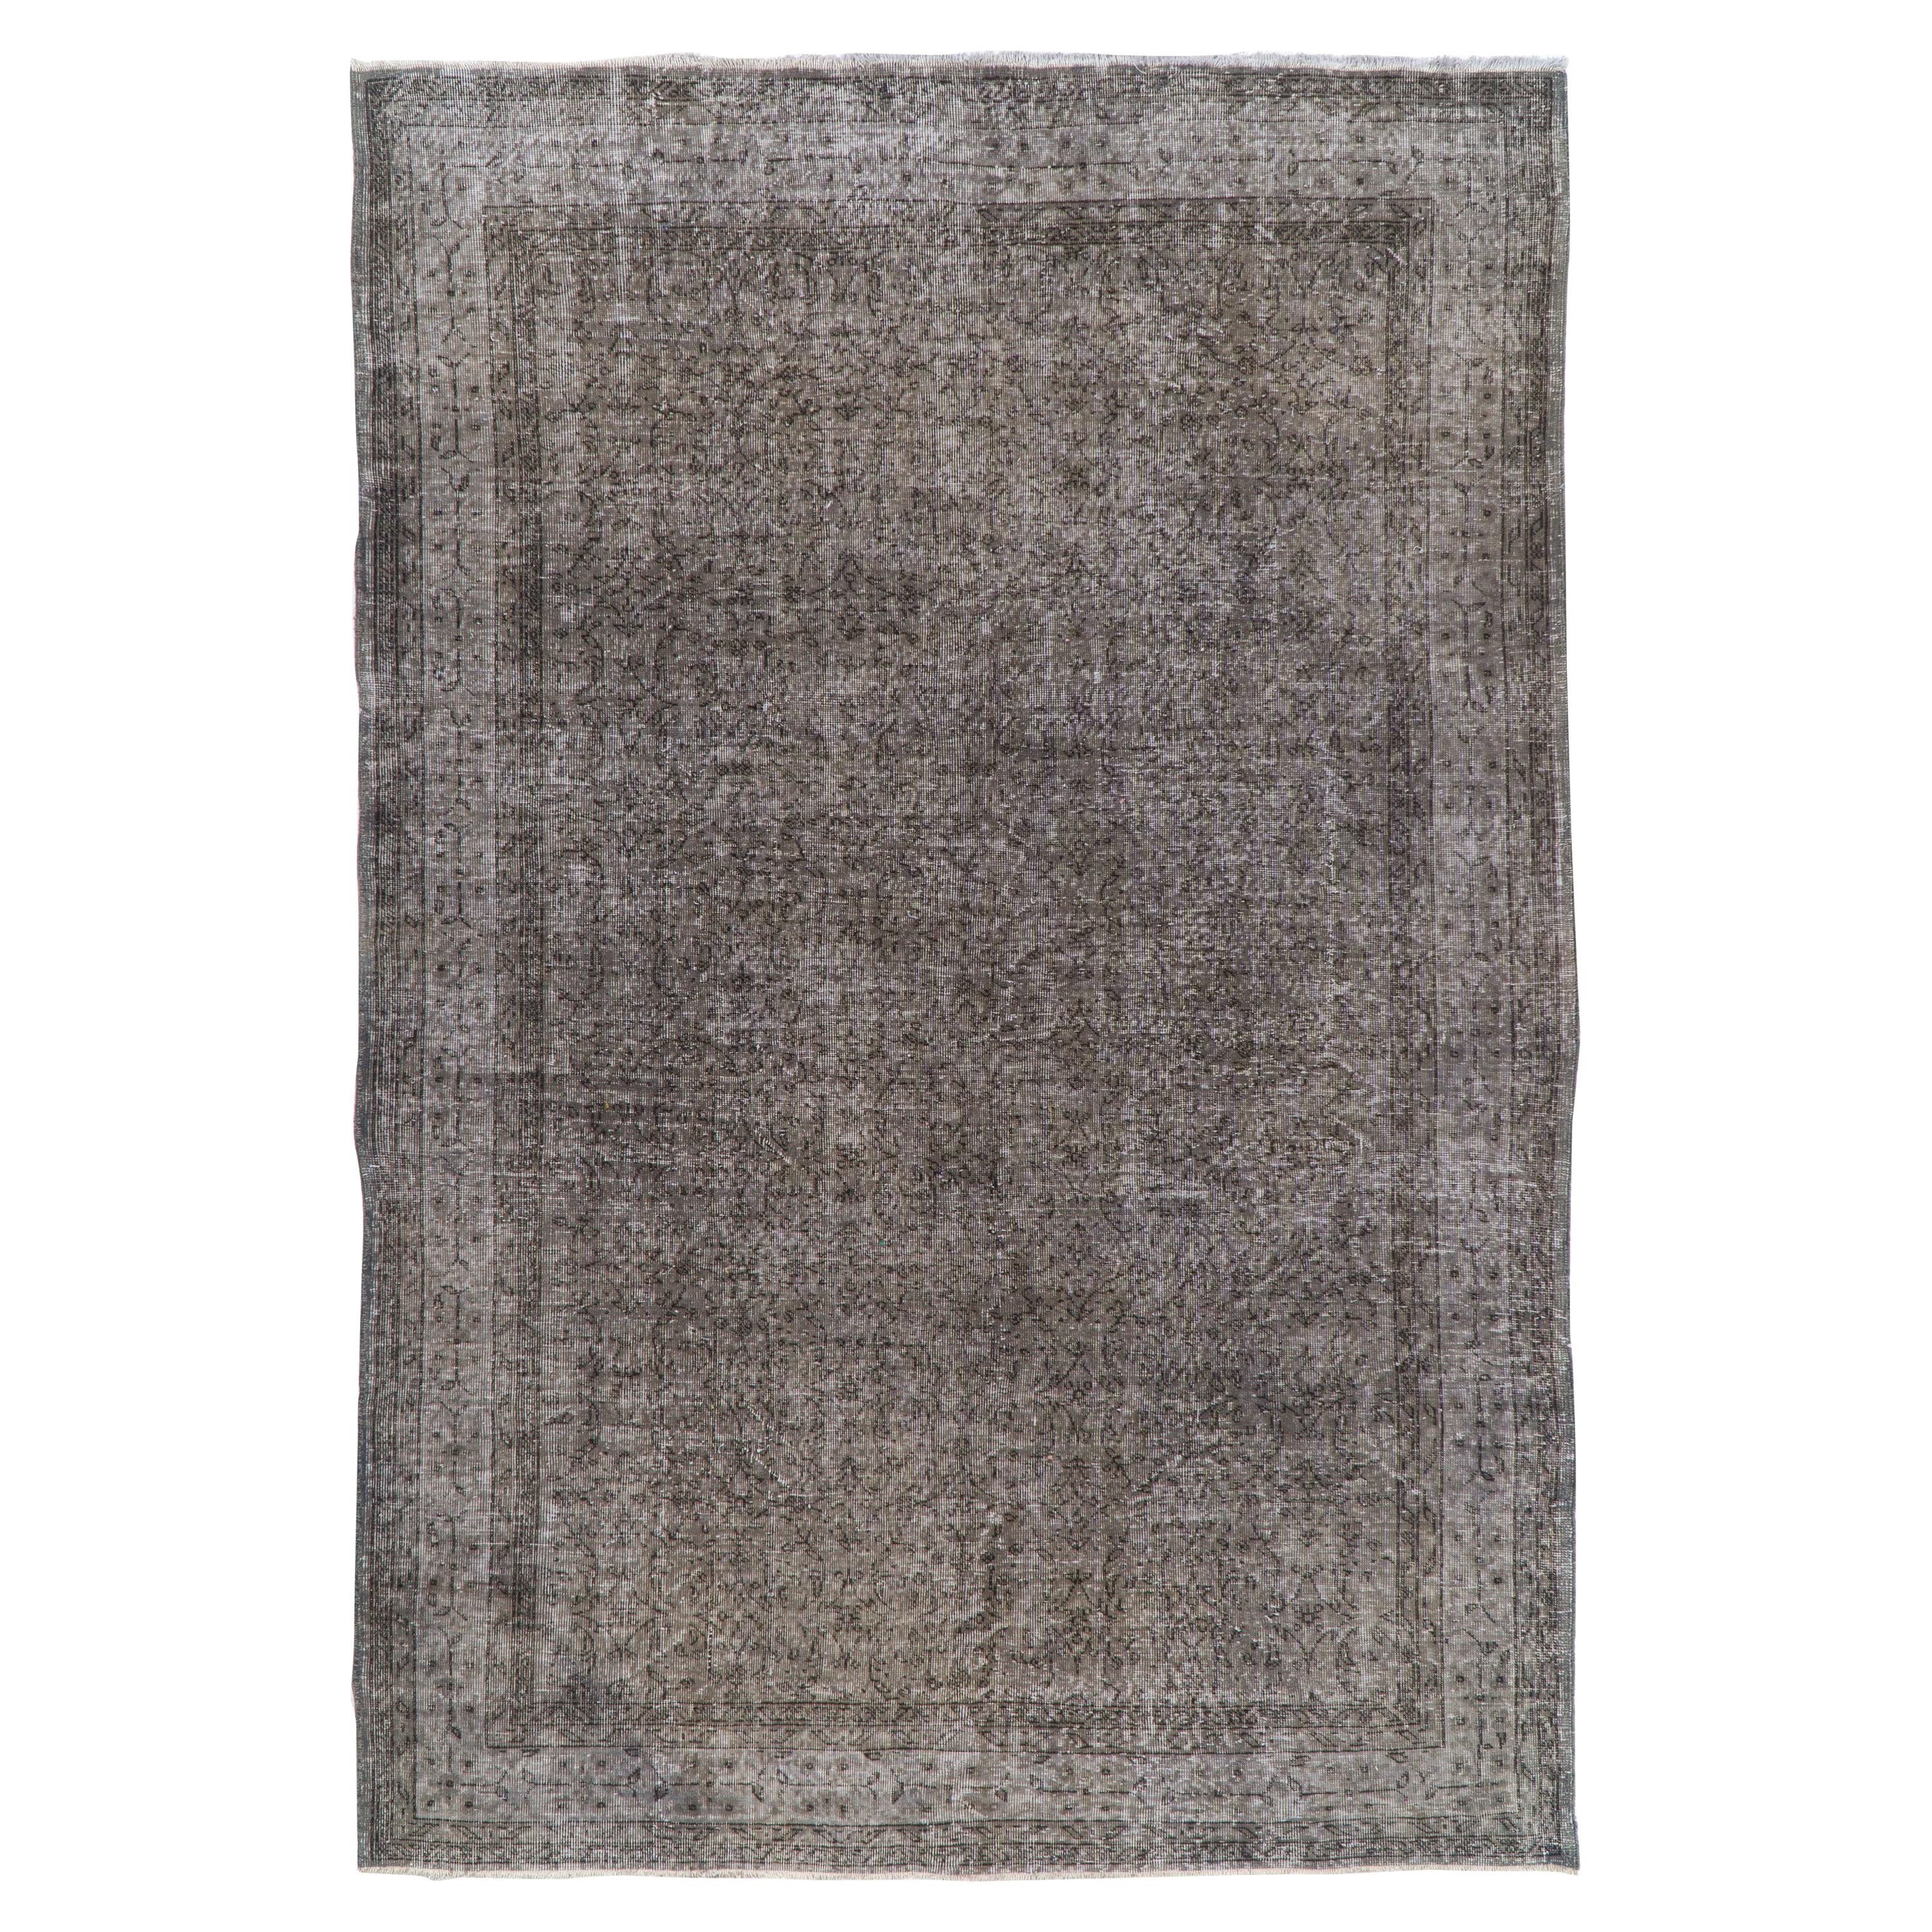 7x10.5 Ft Abstract Hand-Knotted Vintage Contemporary Rug Over-Dyed in Gray Color